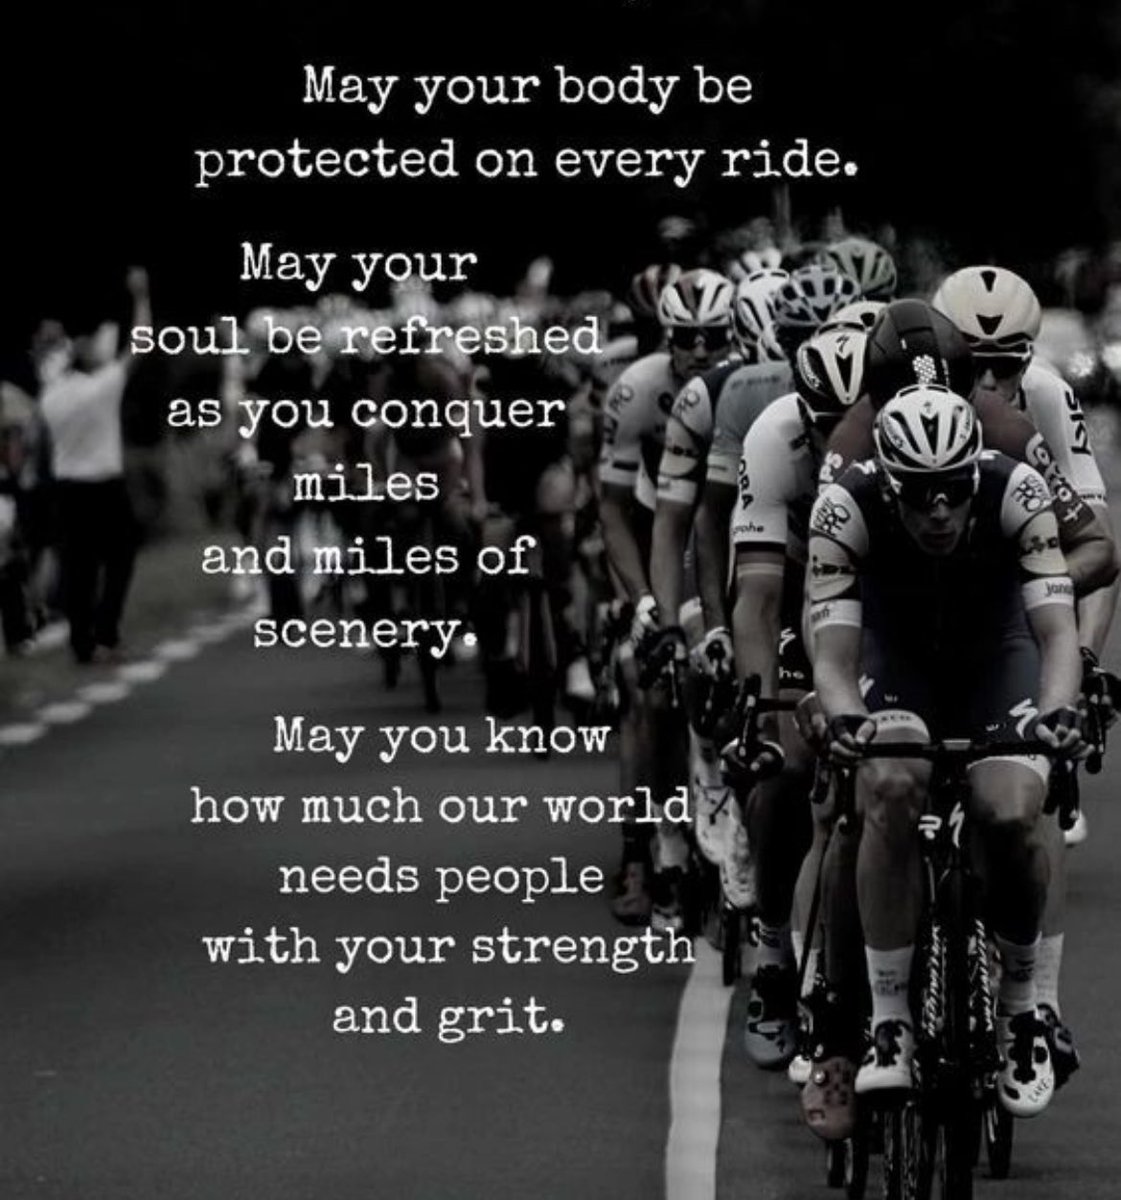 To all our @PanMass friends and cyclists using bikes to fight diseases!